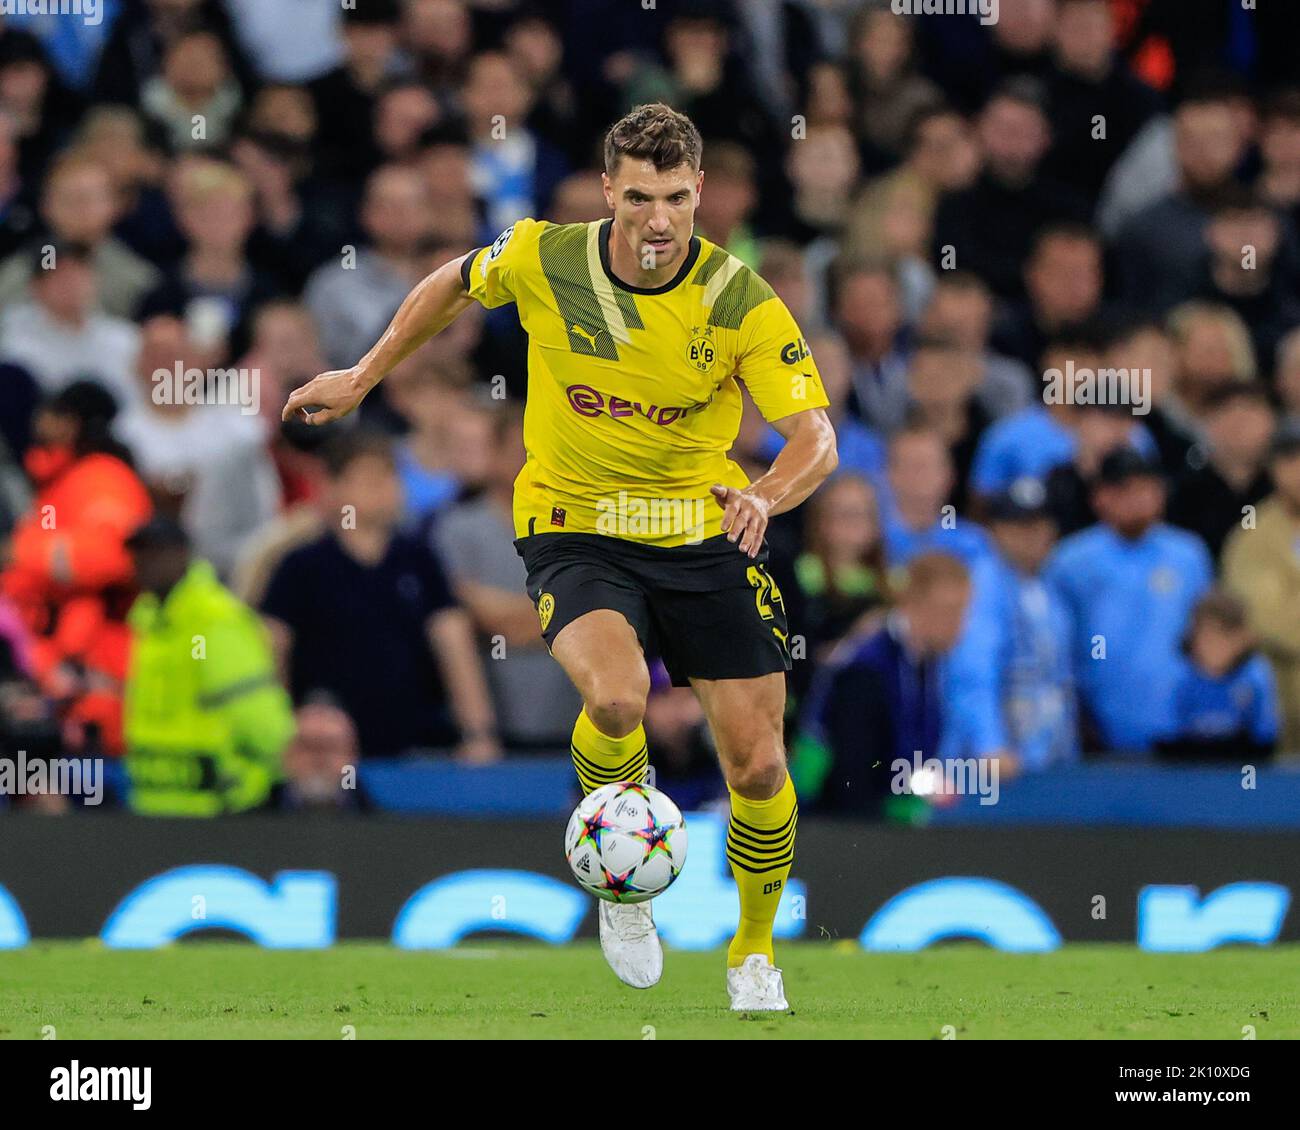 Manchester, UK. 14th Sep, 2022. Thomas Meunier #24 of Borussia Dortmund in action during the UEFA Champions League match Manchester City vs Borussia Dortmund at Etihad Stadium, Manchester, United Kingdom, 14th September 2022 (Photo by Conor Molloy/News Images) Credit: News Images LTD/Alamy Live News Stock Photo